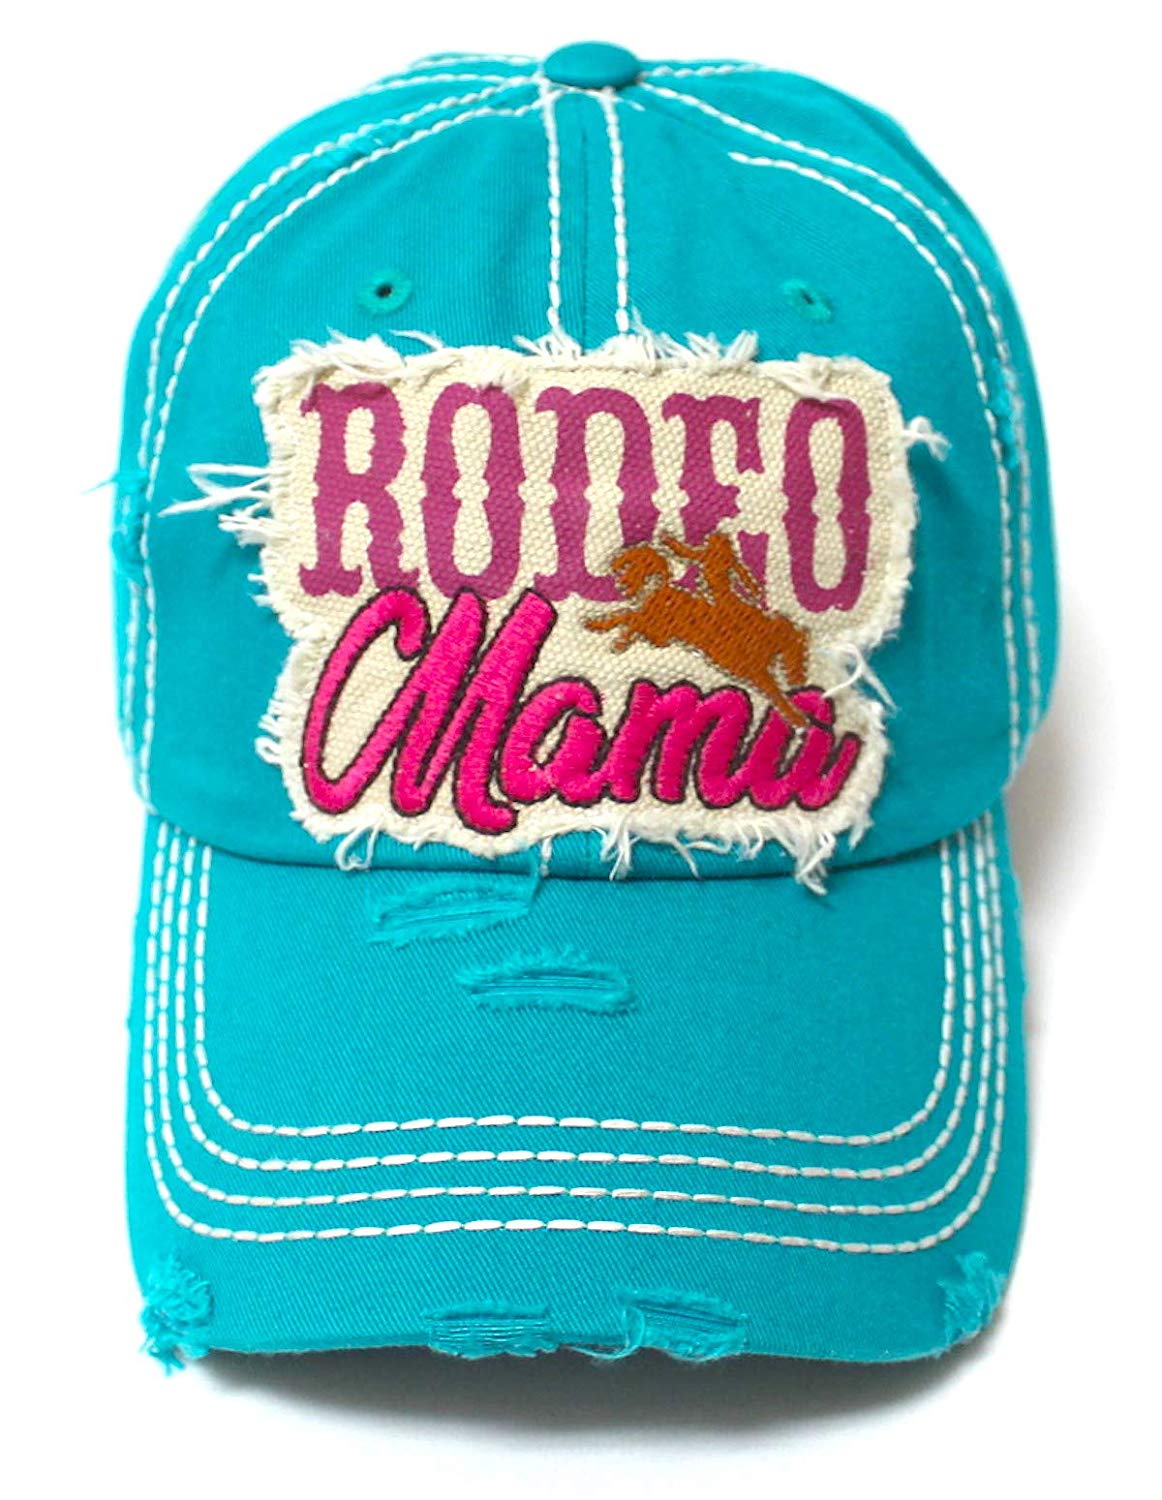 Classic Country Western Ballcap Rodeo Mama Monogram Patch Embroidery Adjustable Baseball Hat, Turquoise - Caps 'N Vintage 